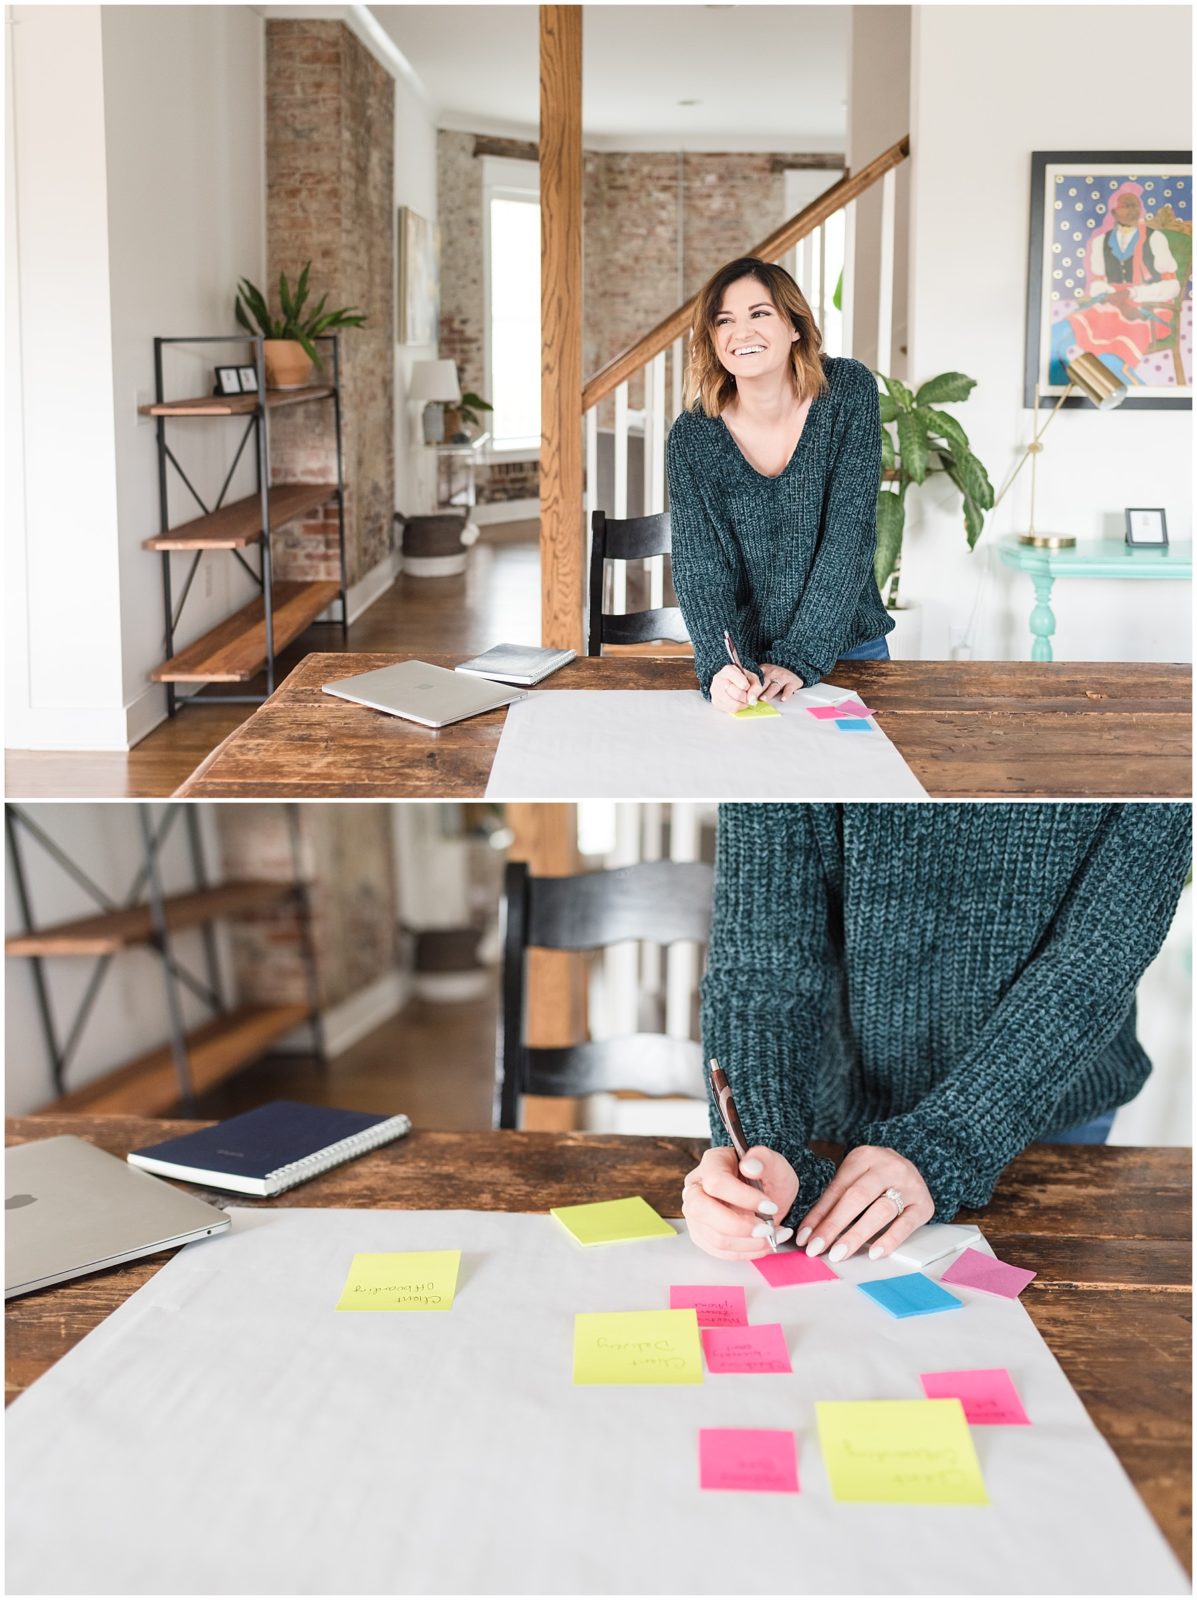 Woman business owner in a dark teal sweater writing on post-it notes for a brand photoshoot.